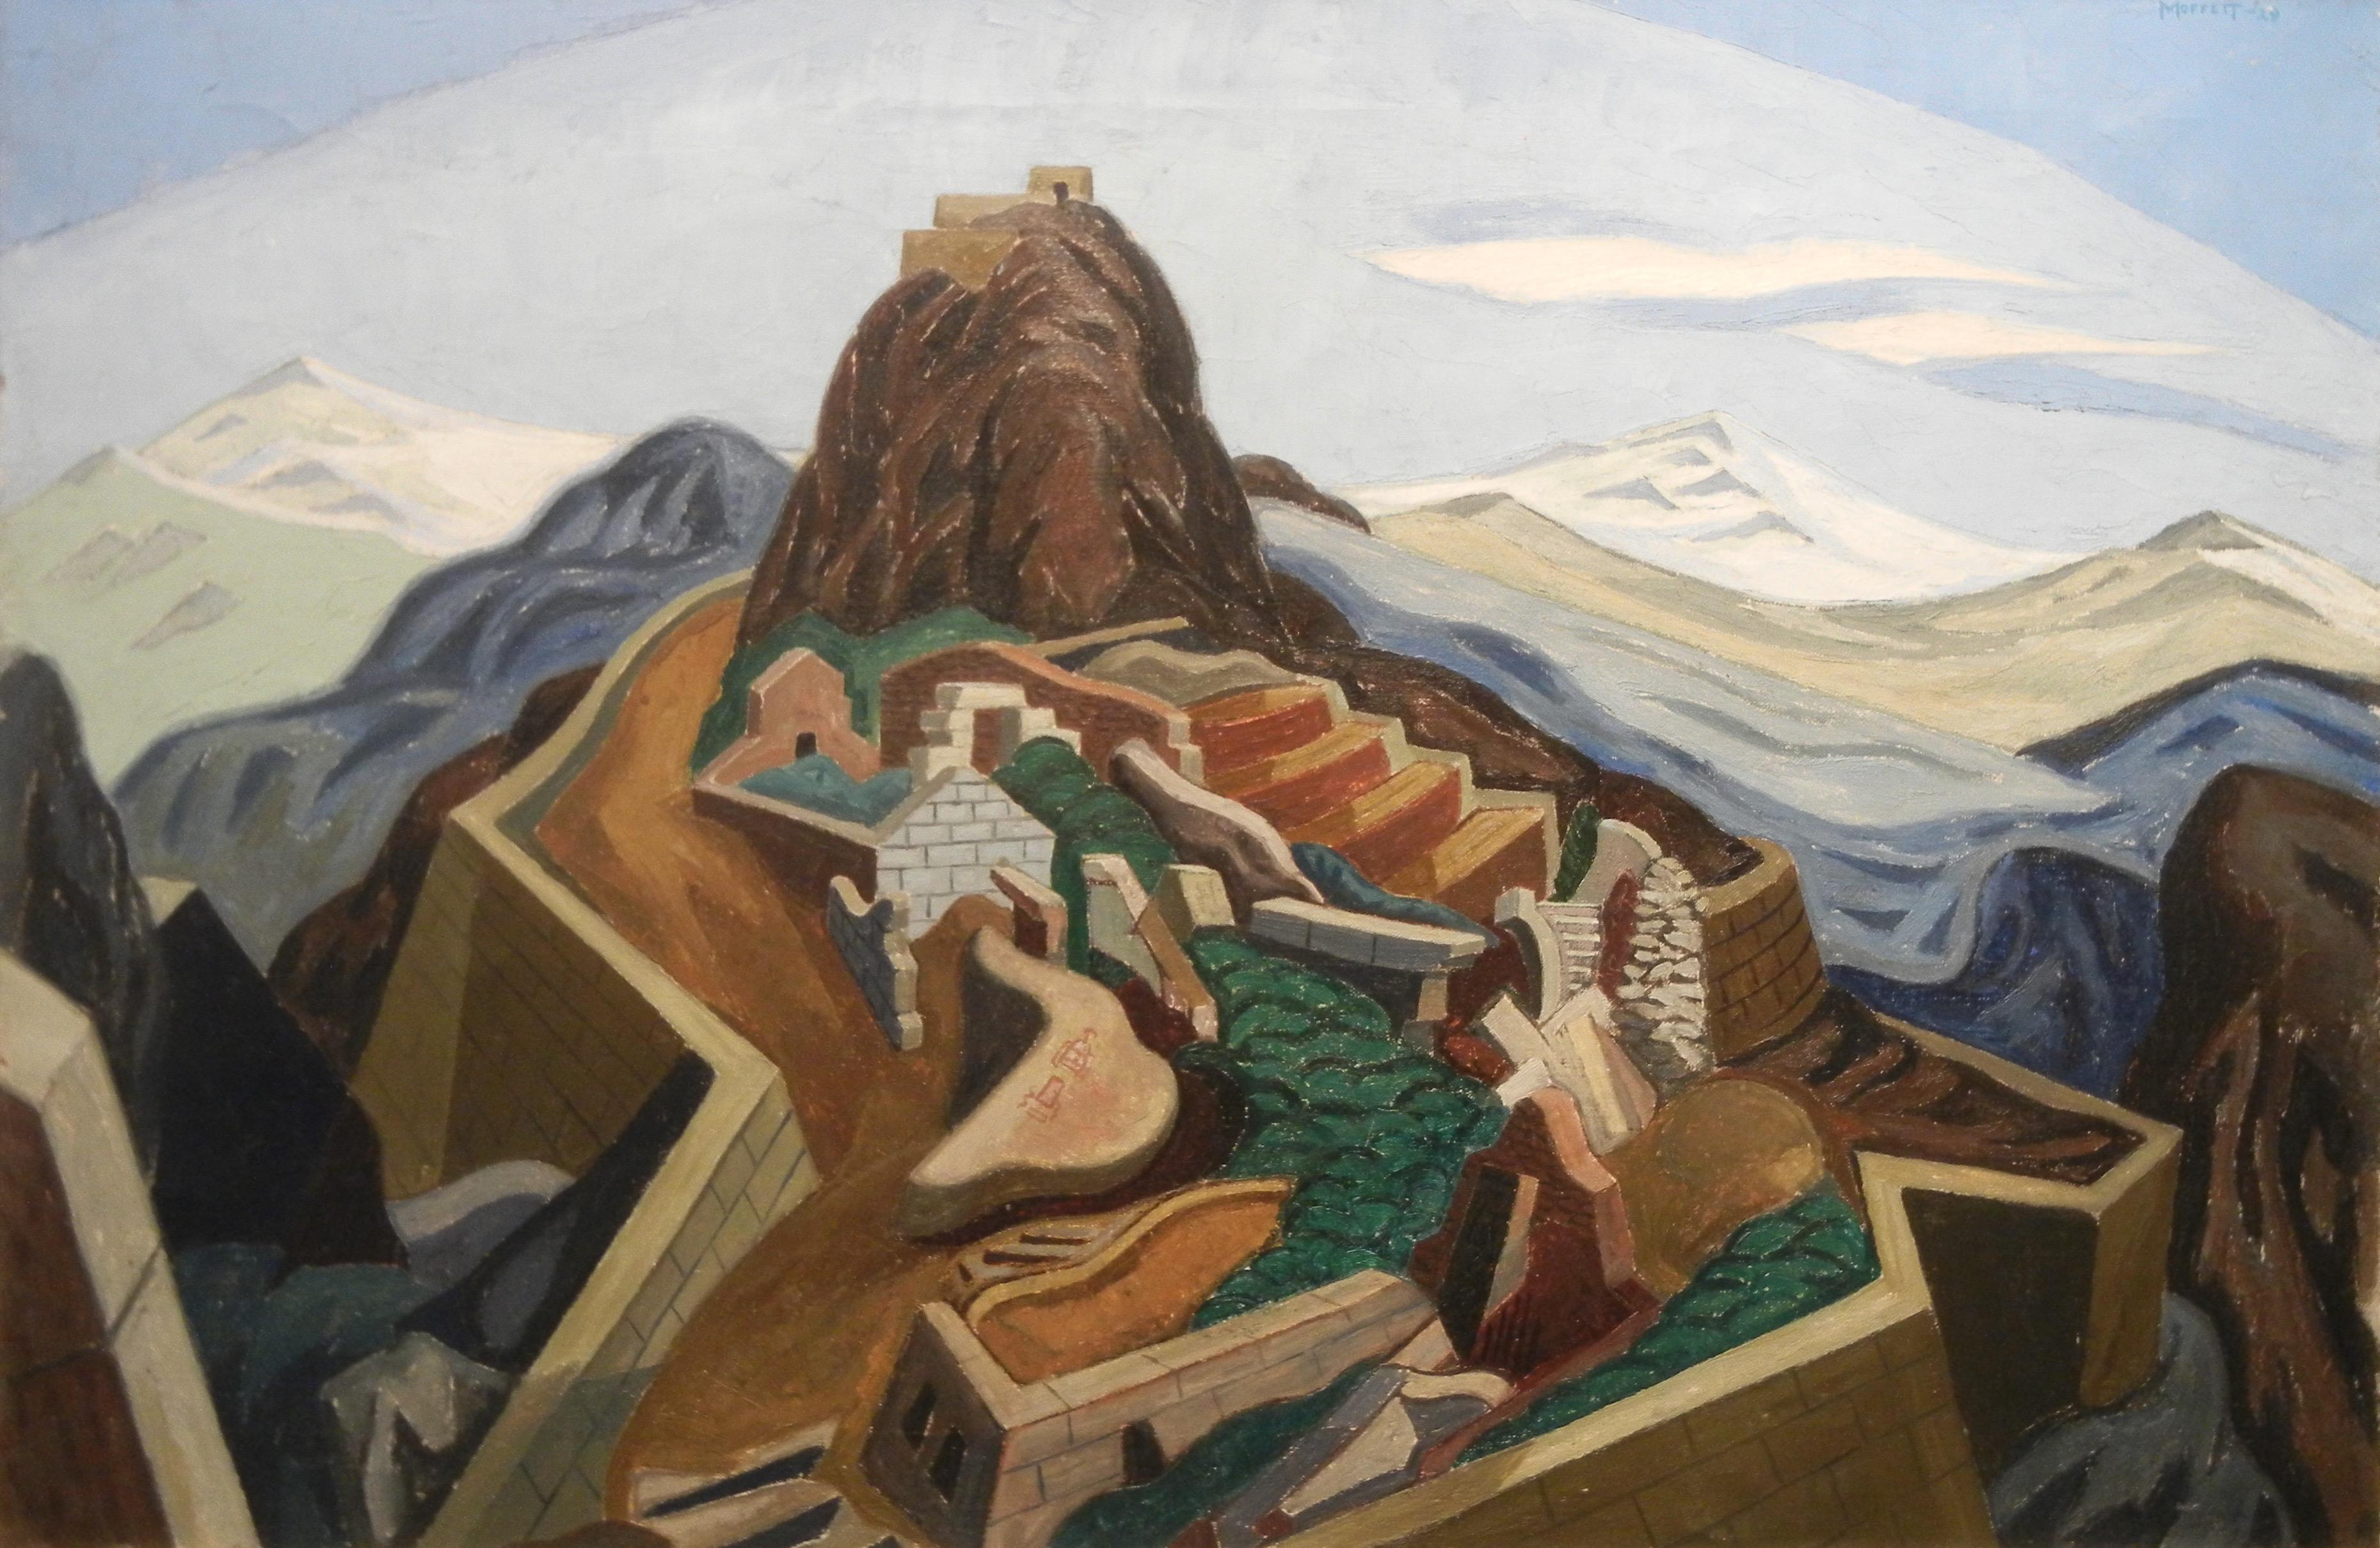 Ross Moffett Landscape Painting - The Lost City in the Andes (Machu Picchu